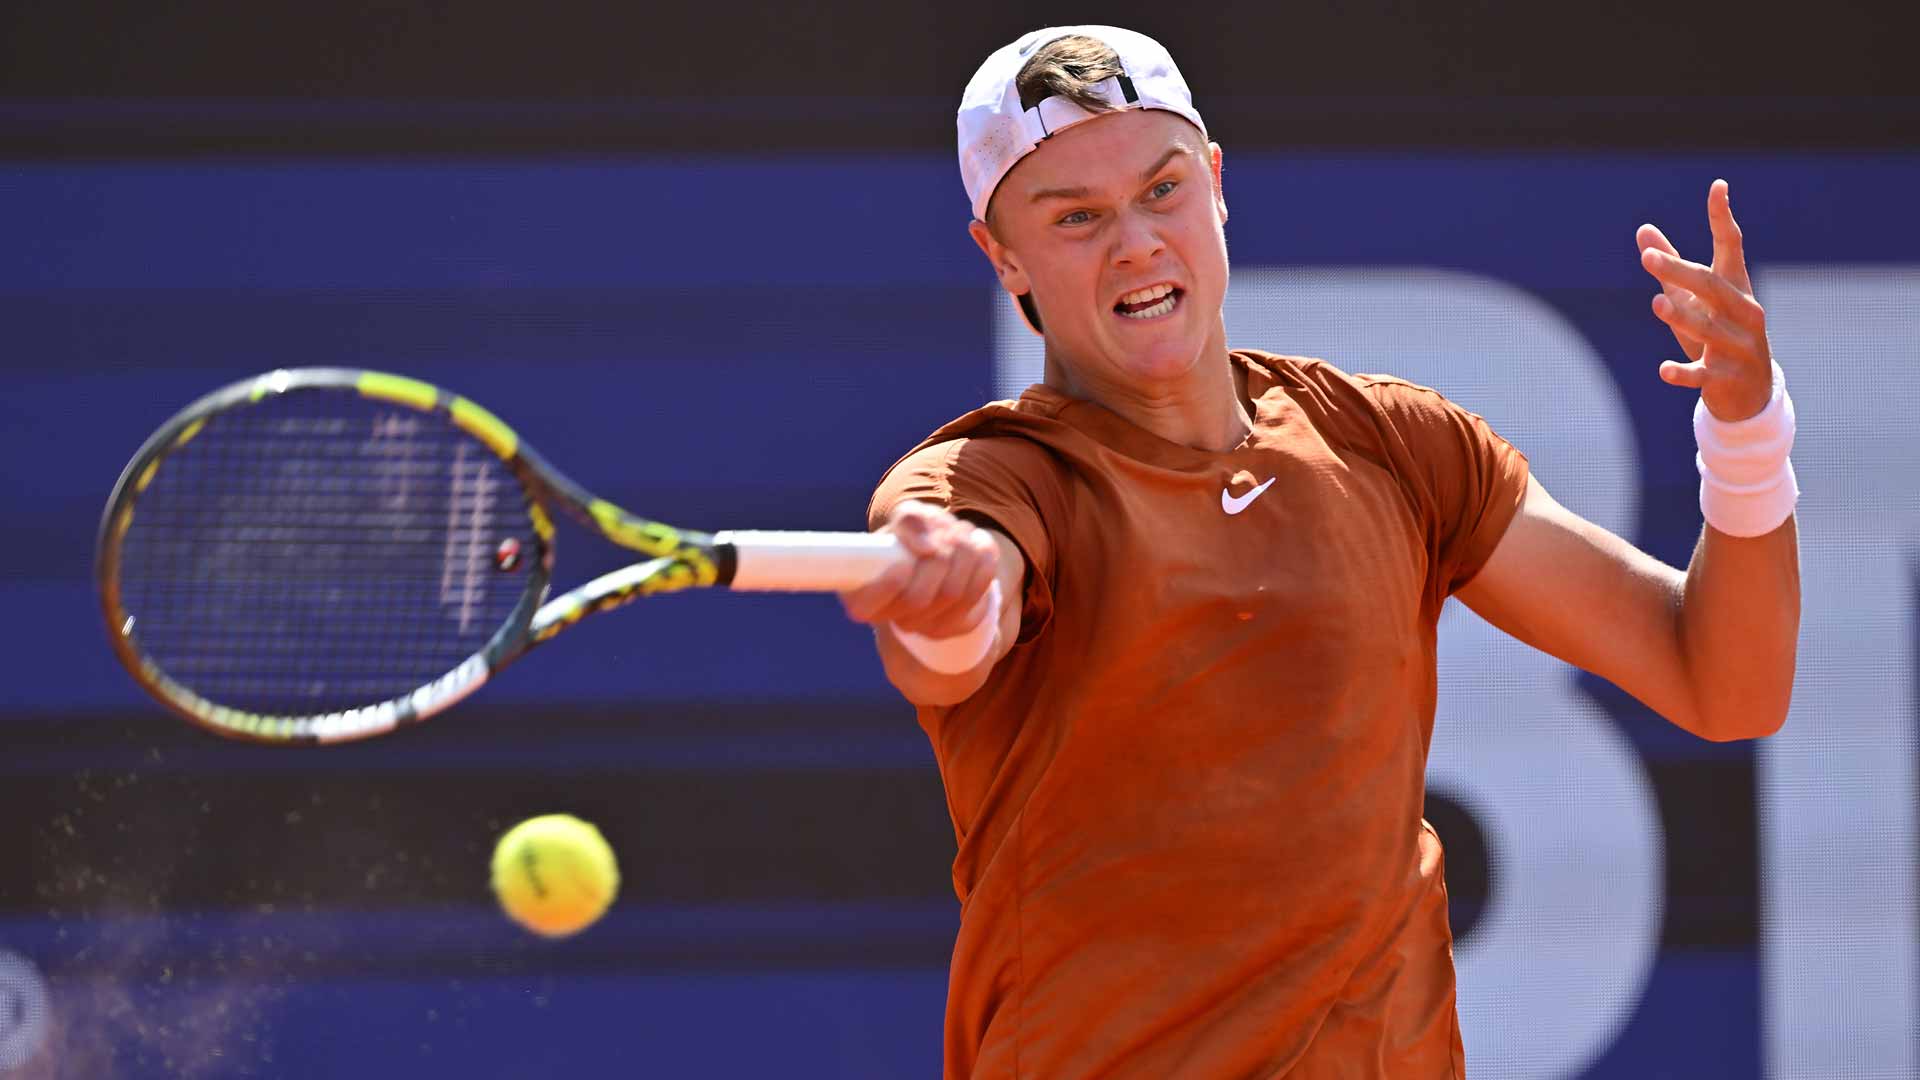 Holger Rune defeats Christopher O'Connell in straight sets Saturday to reach the Munich final.